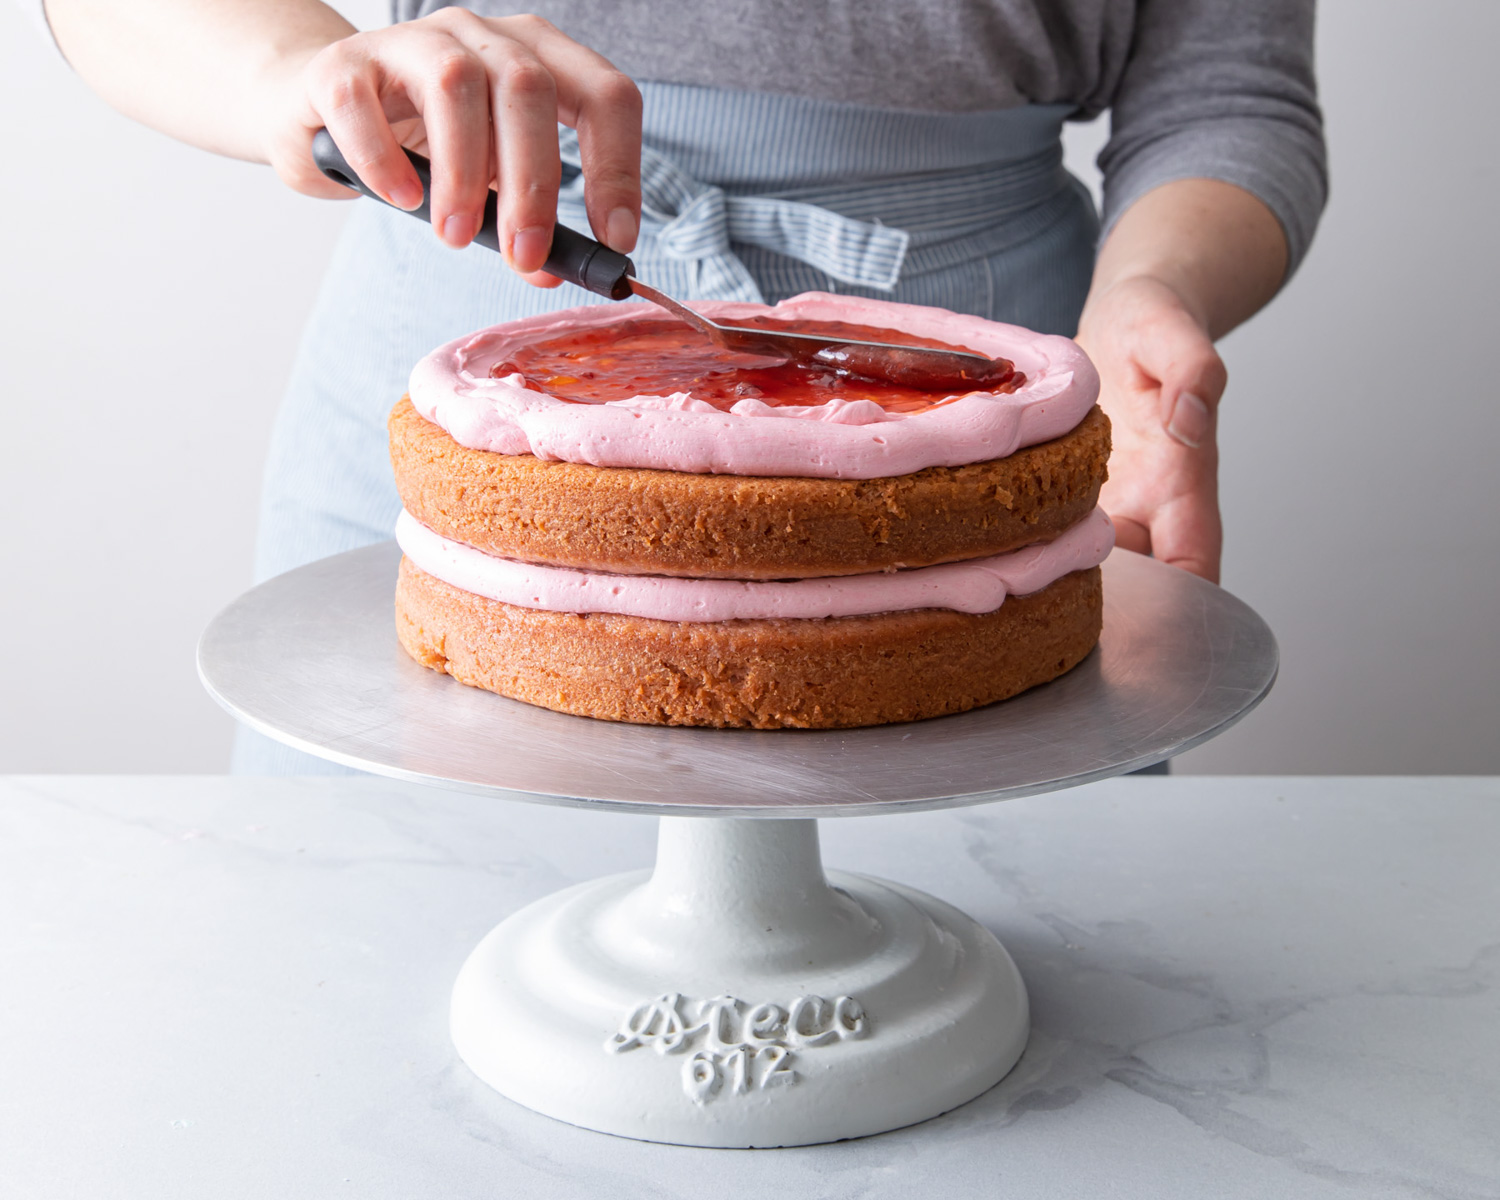 Filling a strawberry cake with strawberry jam